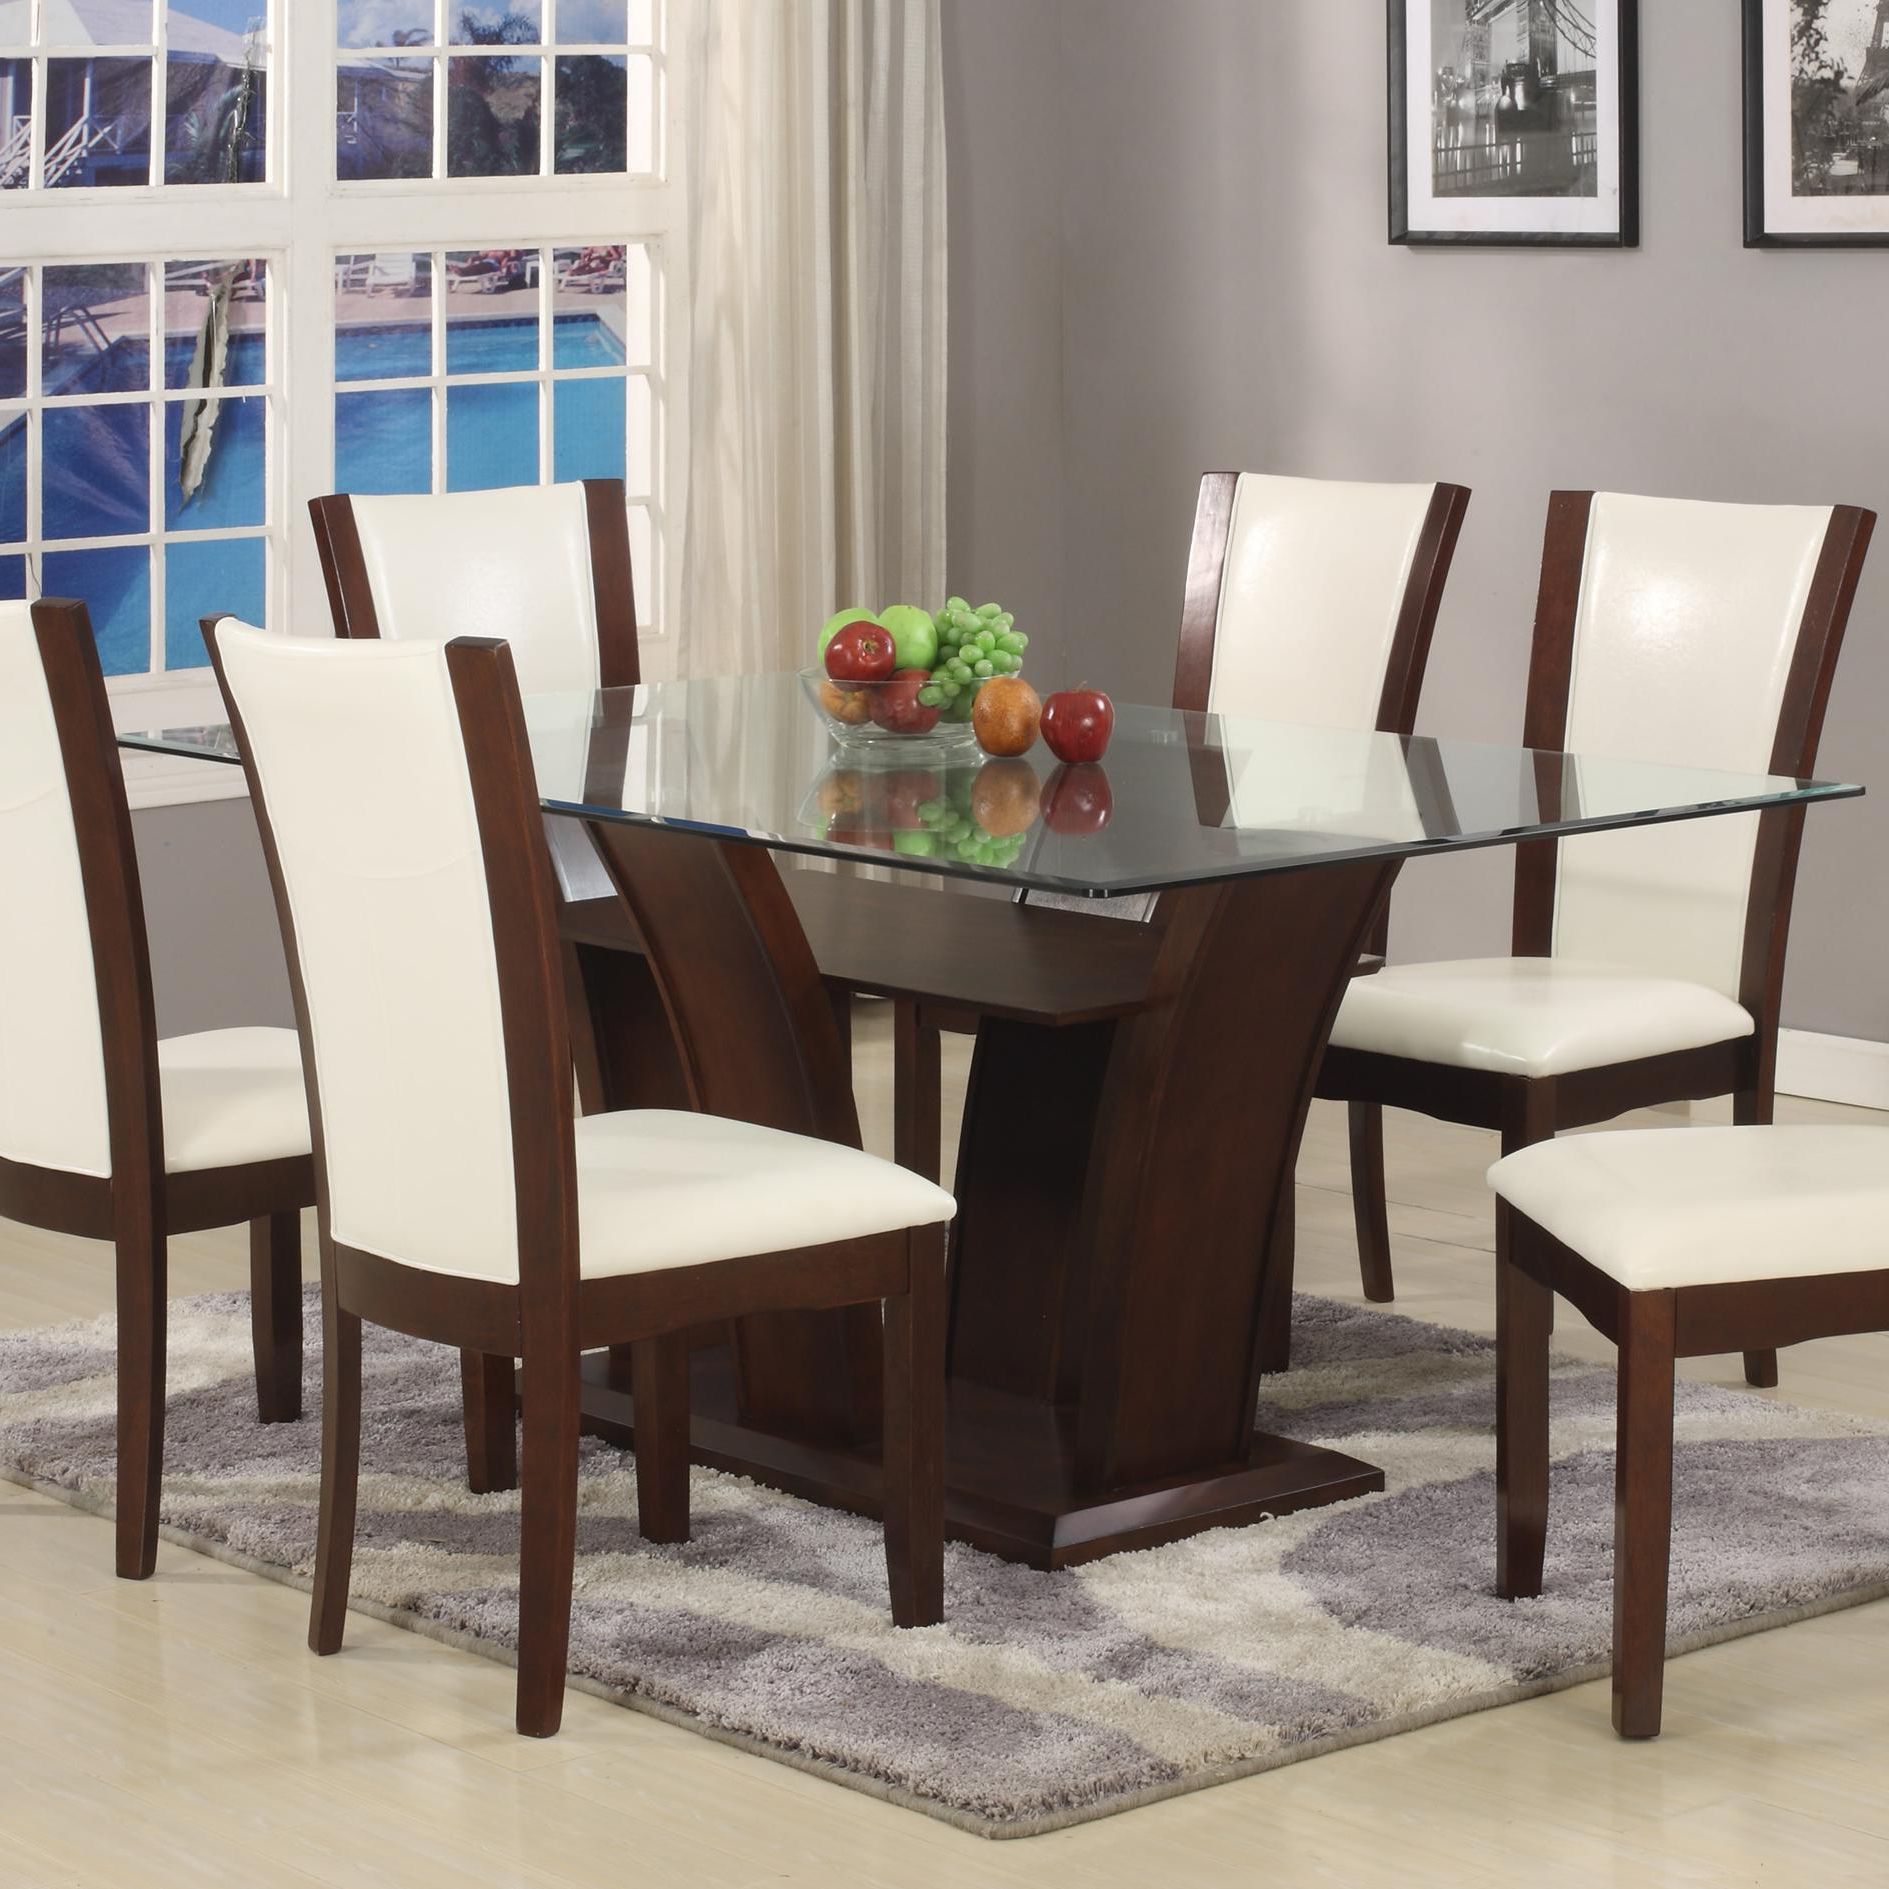 Newest Camelia White Dining Table Pertaining To Rectangular Glasstop Dining Tables (View 3 of 30)